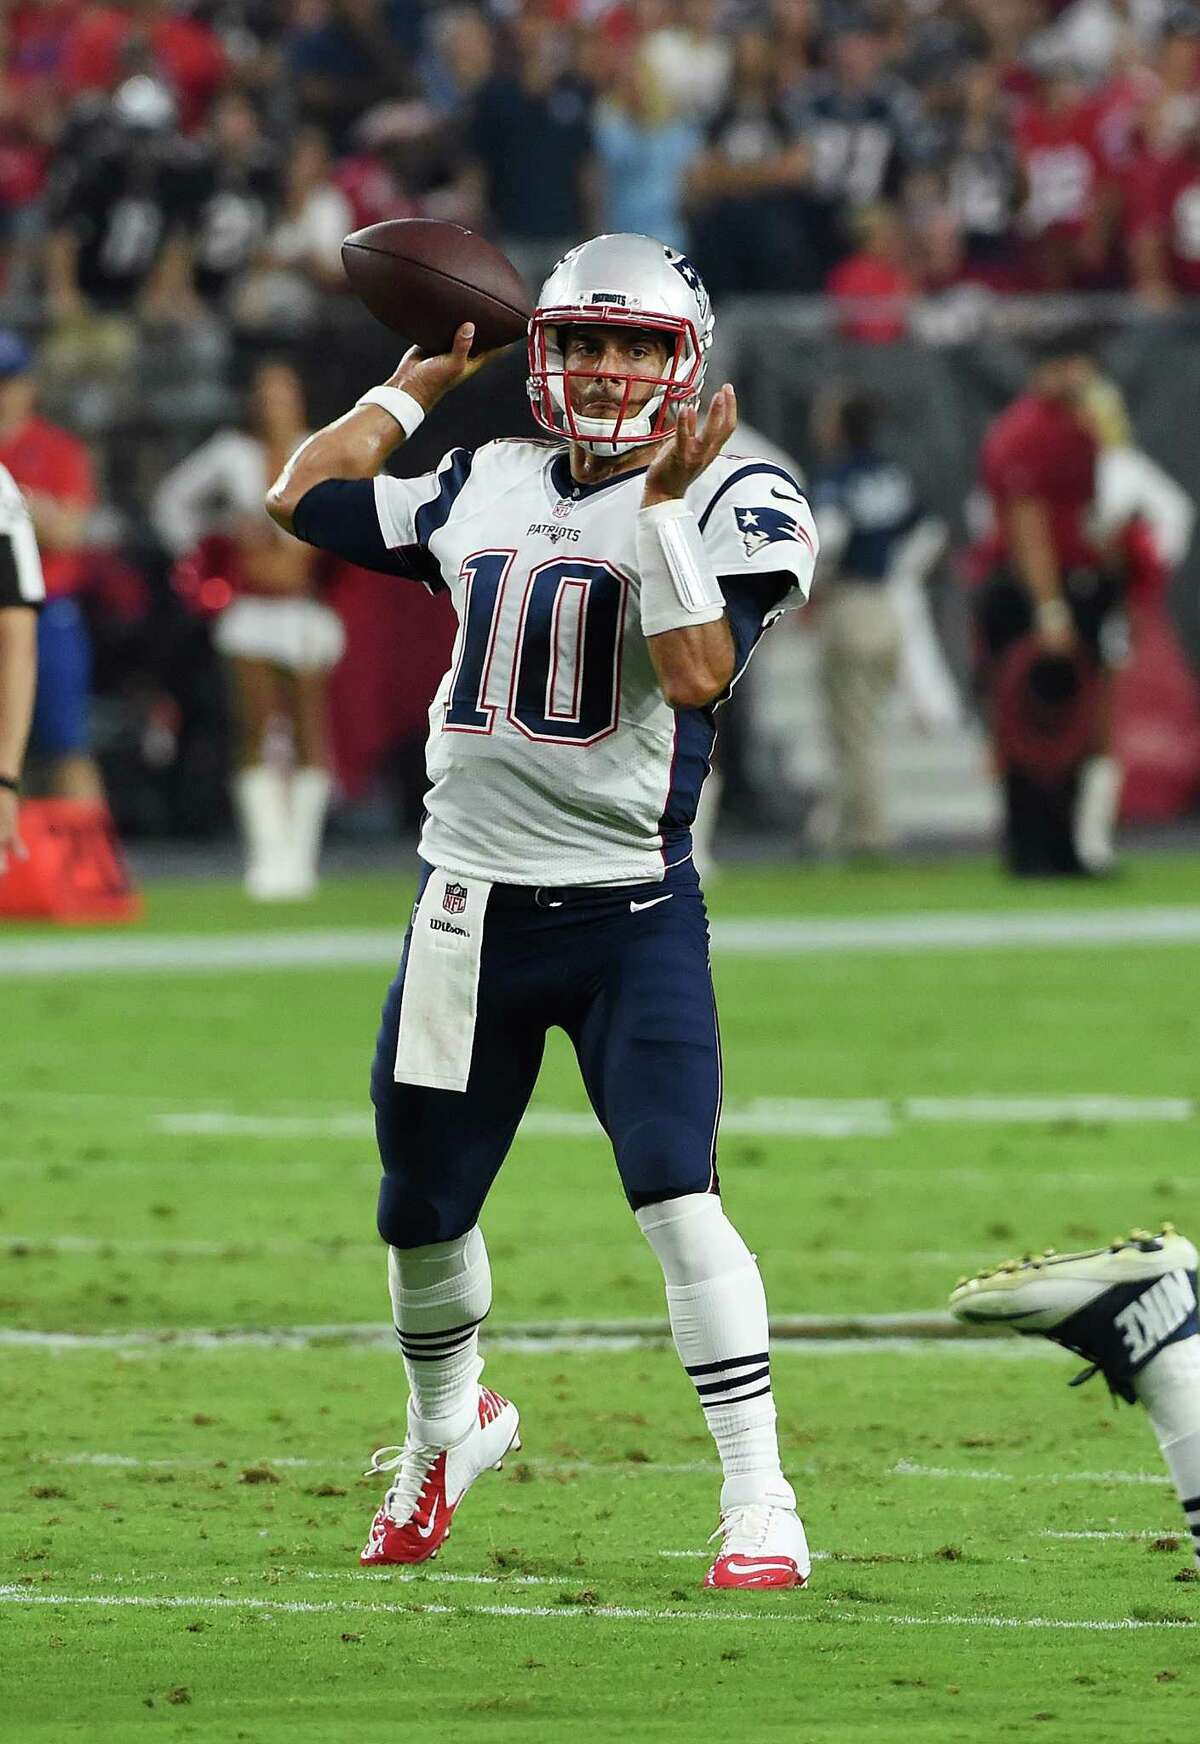 GLENDALE, AZ - SEPTEMBER 11: Quarterback Jimmy Garoppolo #10 of the New England Patriots throws the ball up field against the Arizona Cardinals at University of Phoenix Stadium on September 11, 2016 in Glendale, Arizona. (Photo by Norm Hall/Getty Images)